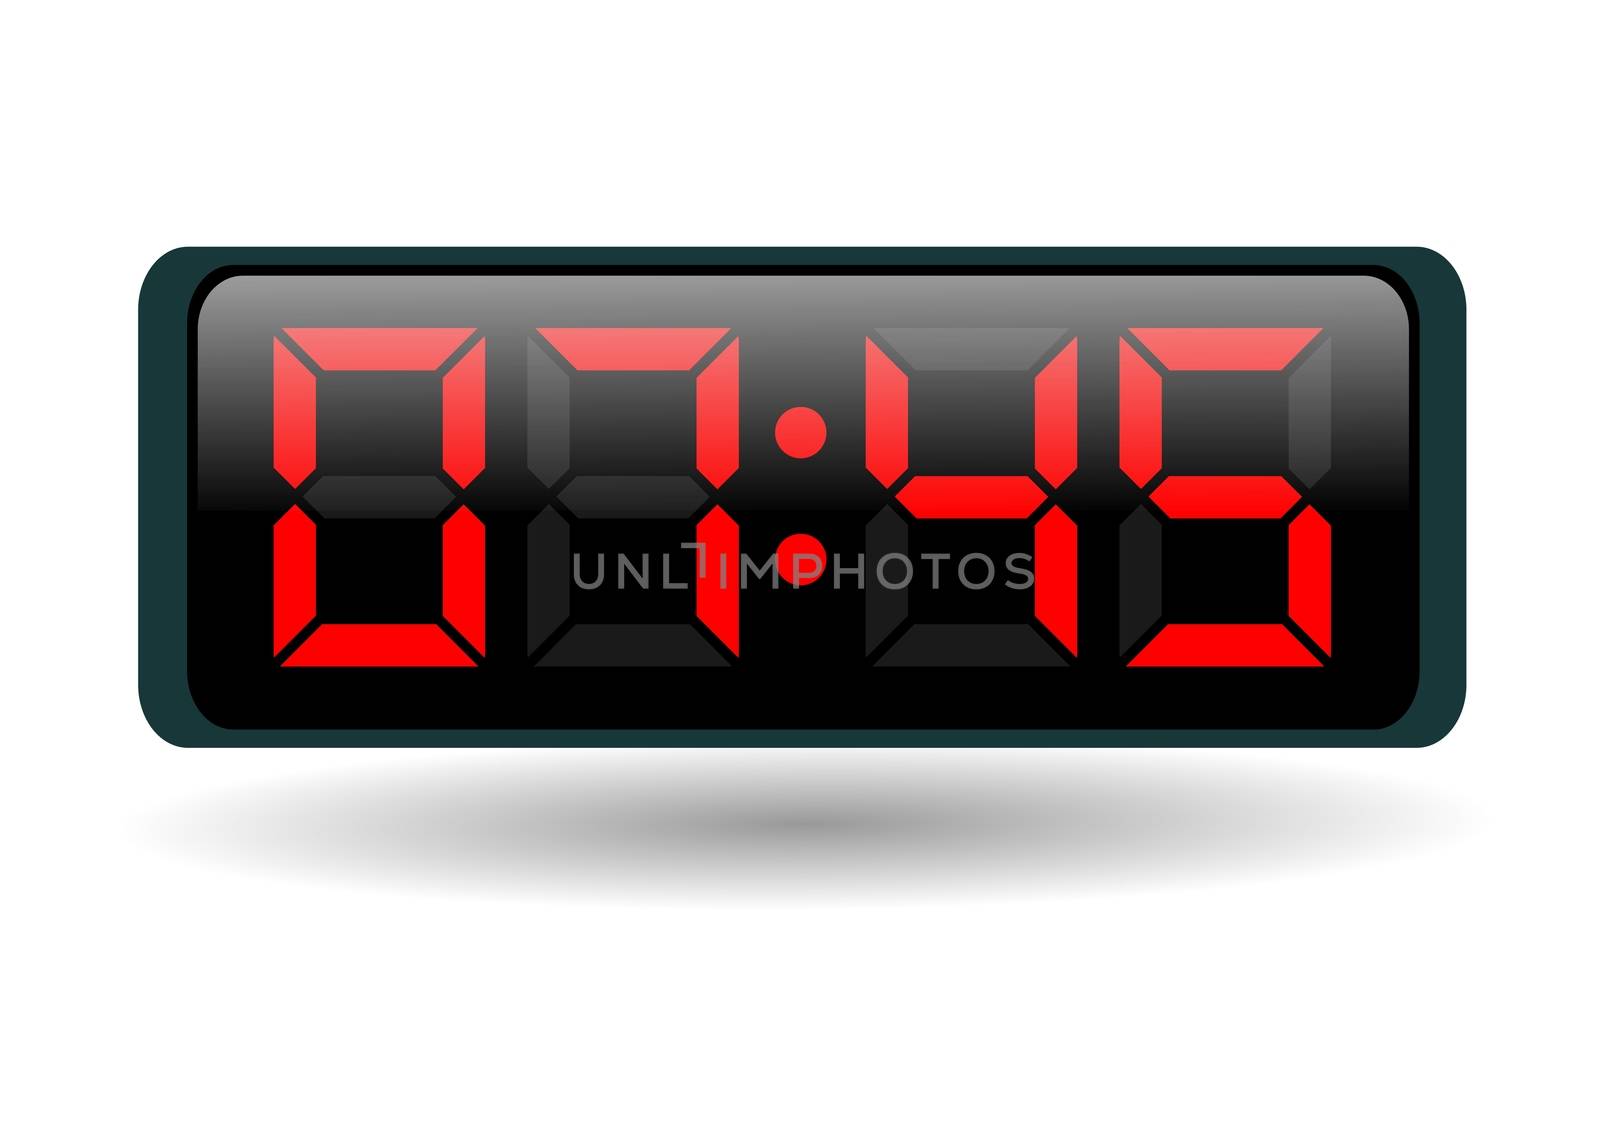 electronic clock with red numbers on white background